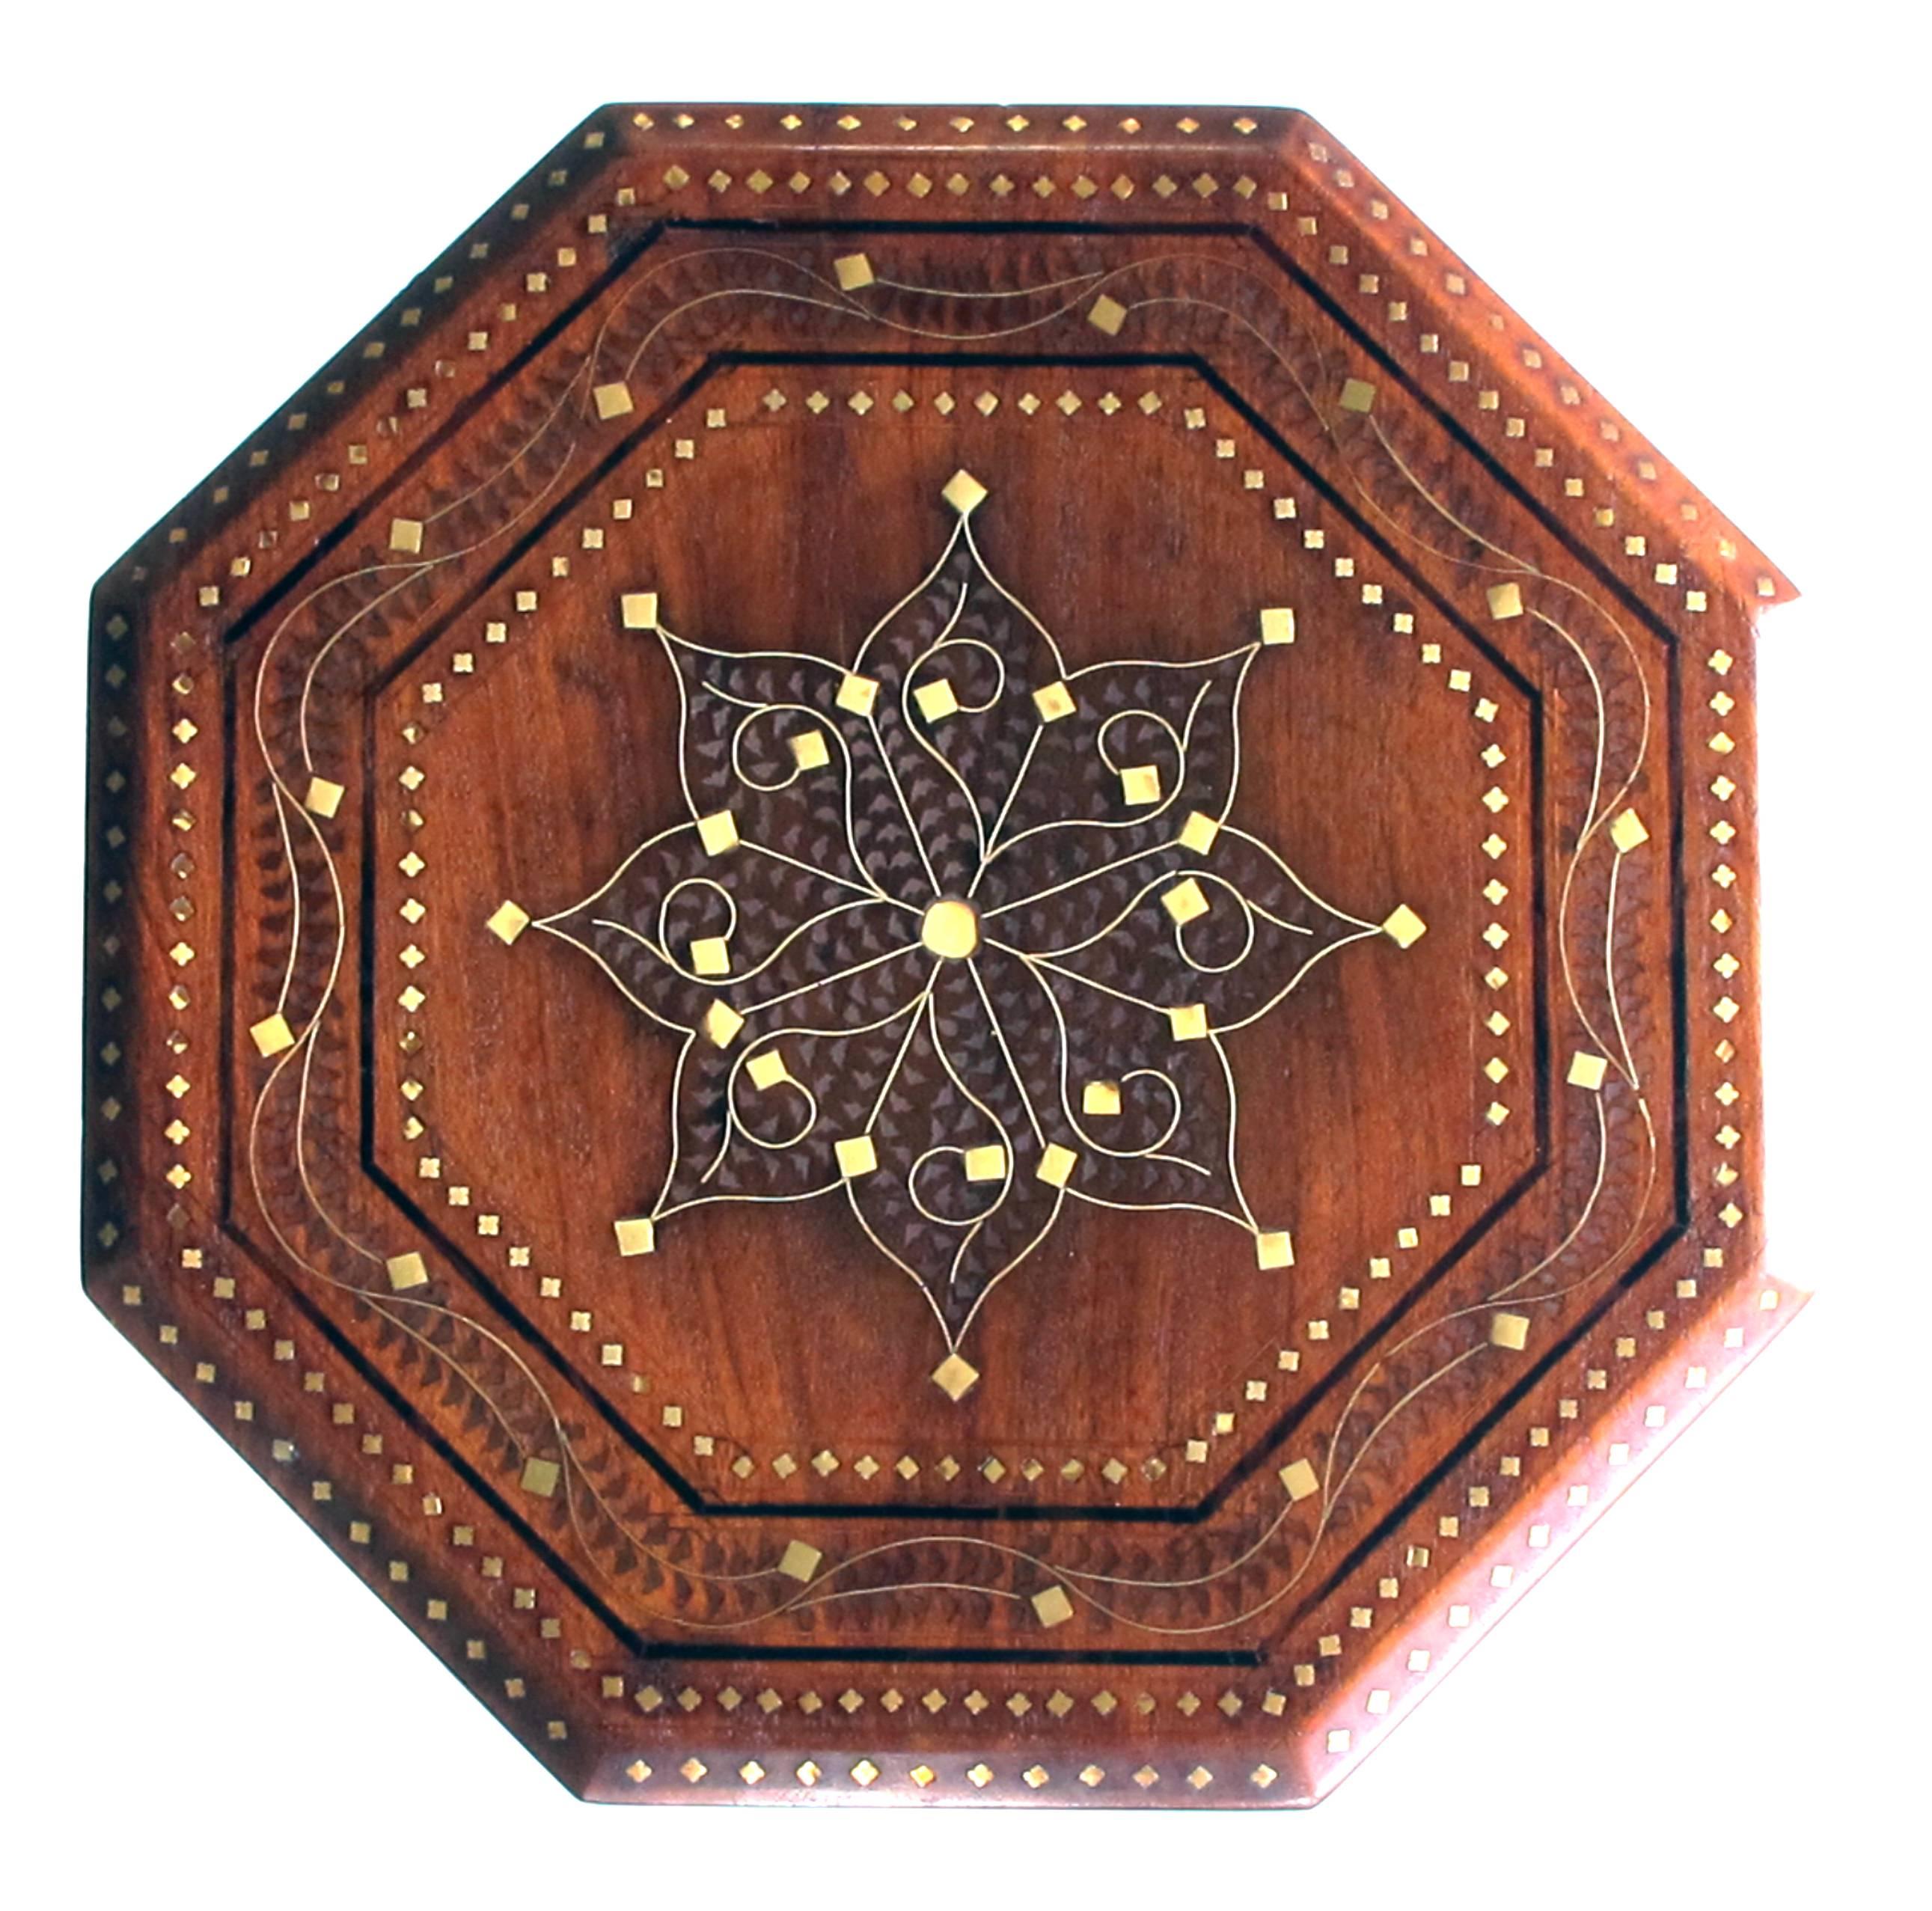 Detailed Brass and Pewter Inlaid Octagonal Anglo-Indian Traveling Table 1